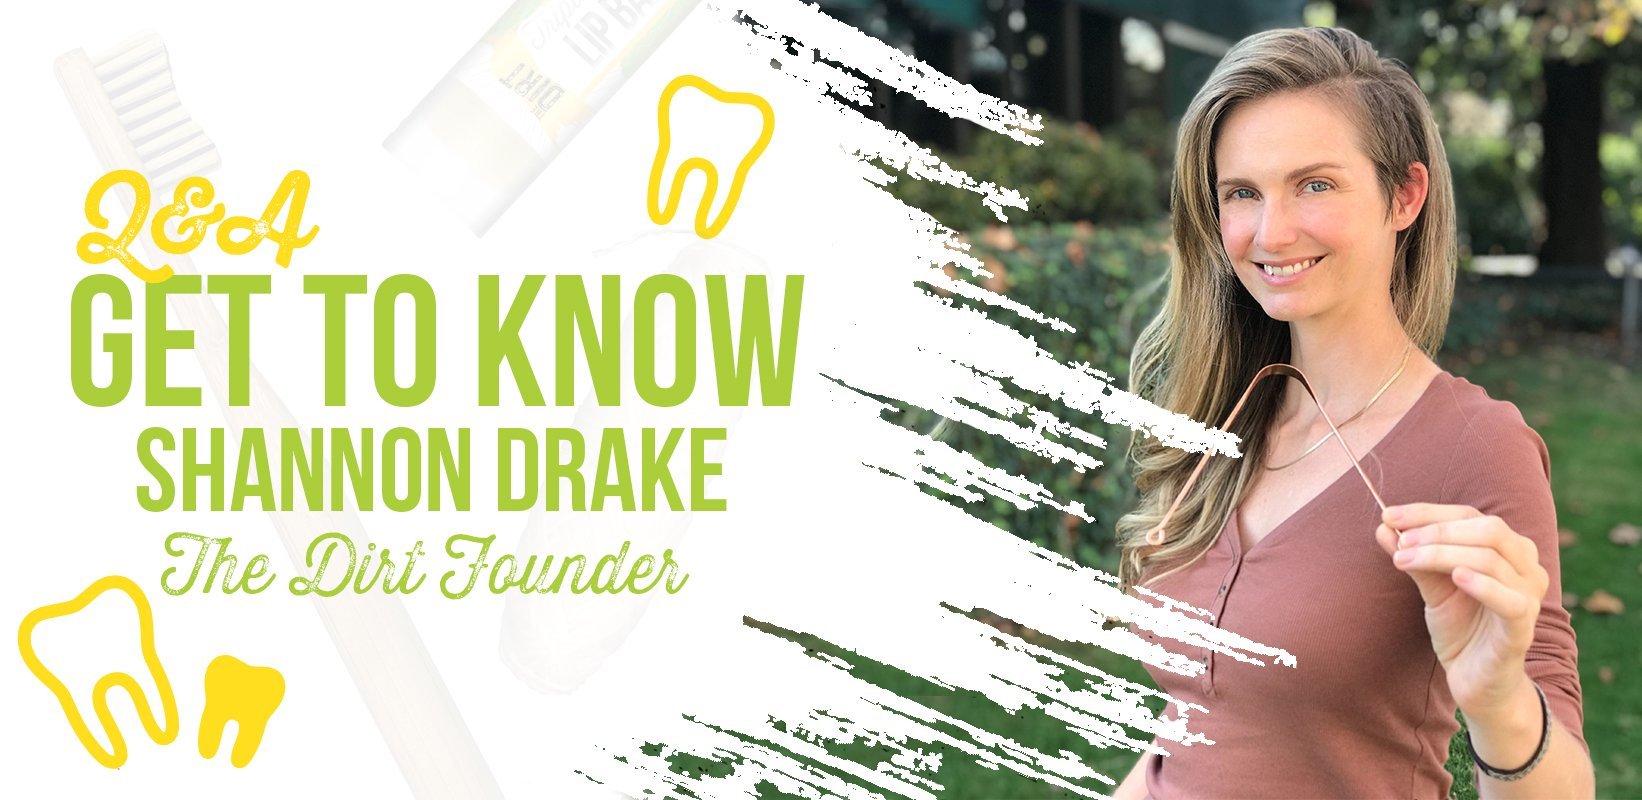 Get to Know The Dirt Founder, Shannon Drake! | The Dirt - Super Natural Personal Care